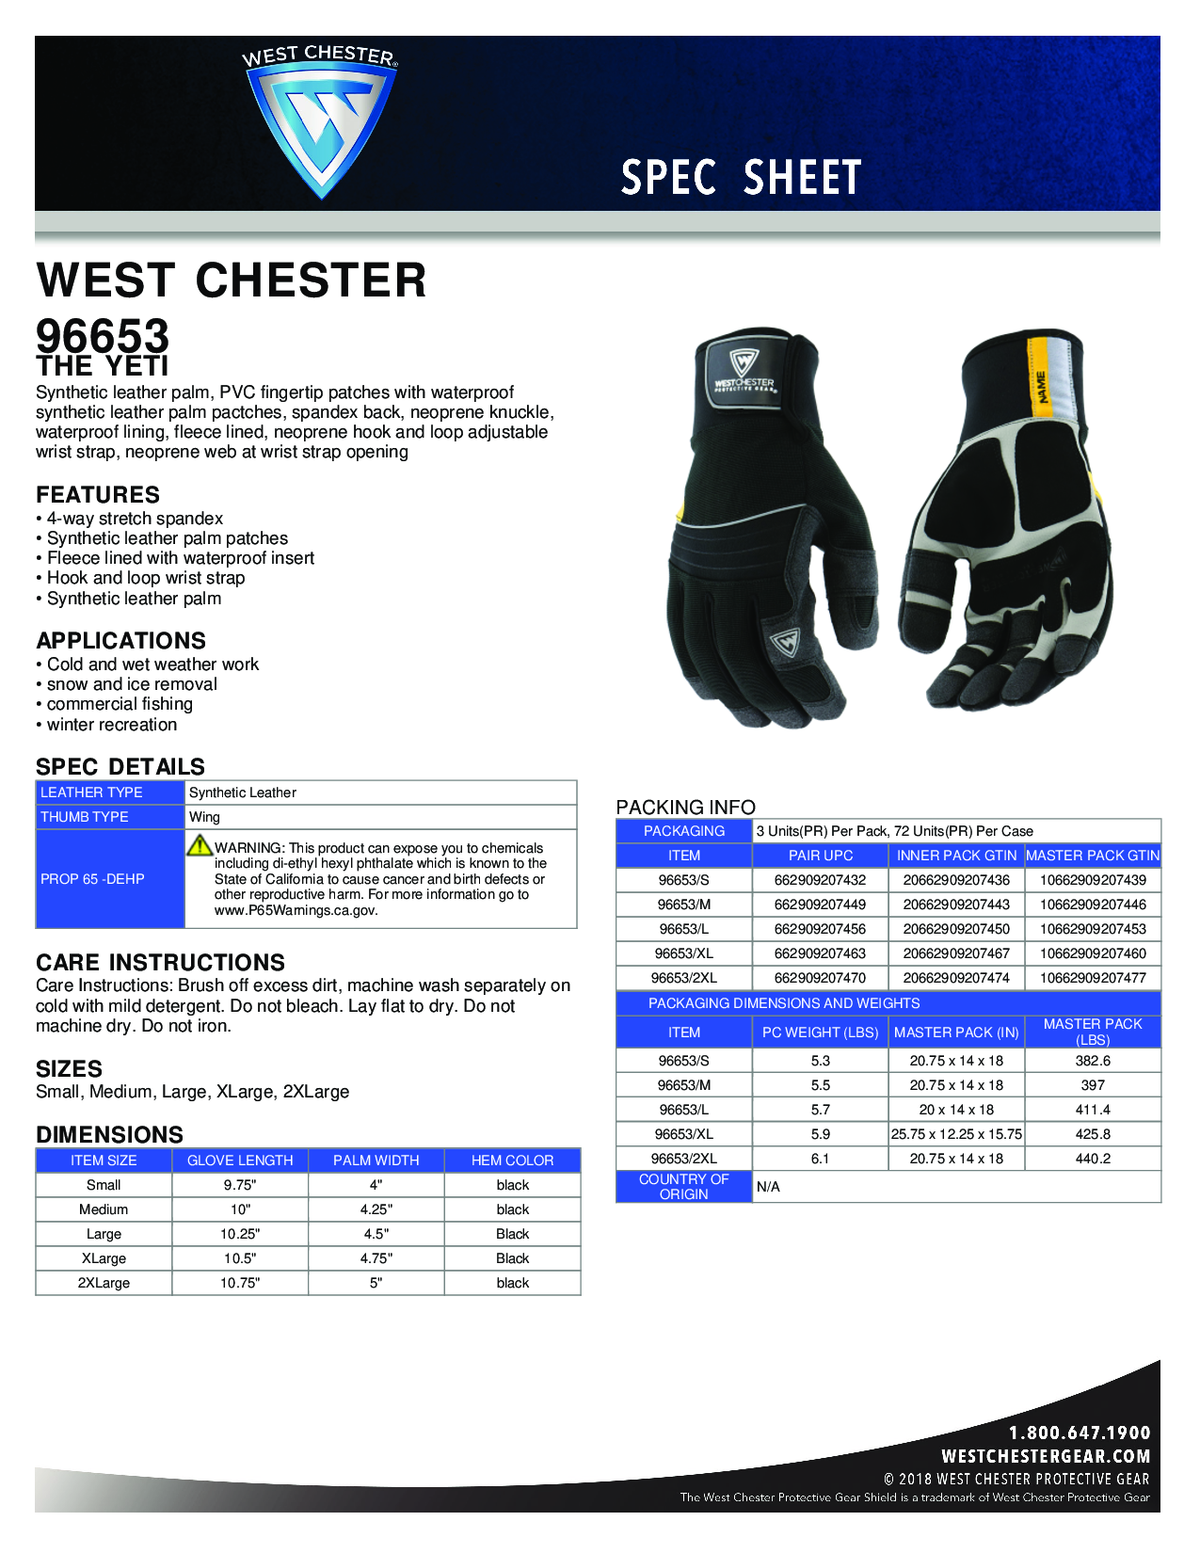 Westchester Premium Coated Thermal Knit Gloves 1PAIR